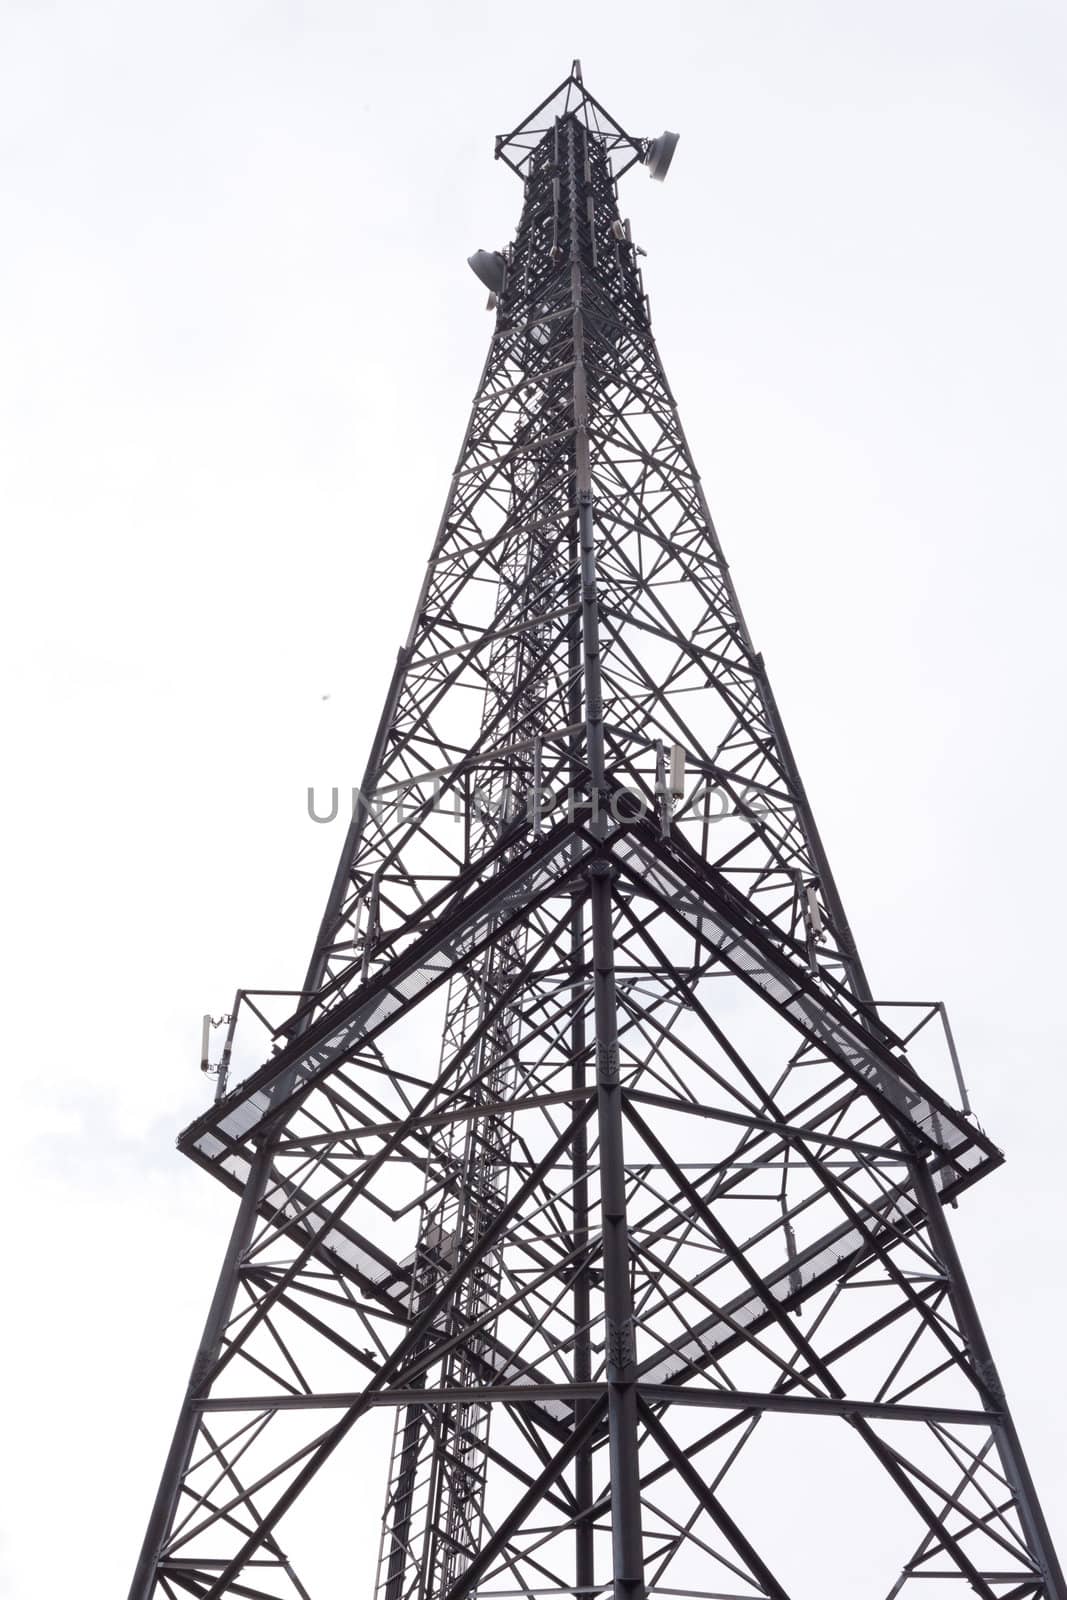 Communications Tower by PiLens